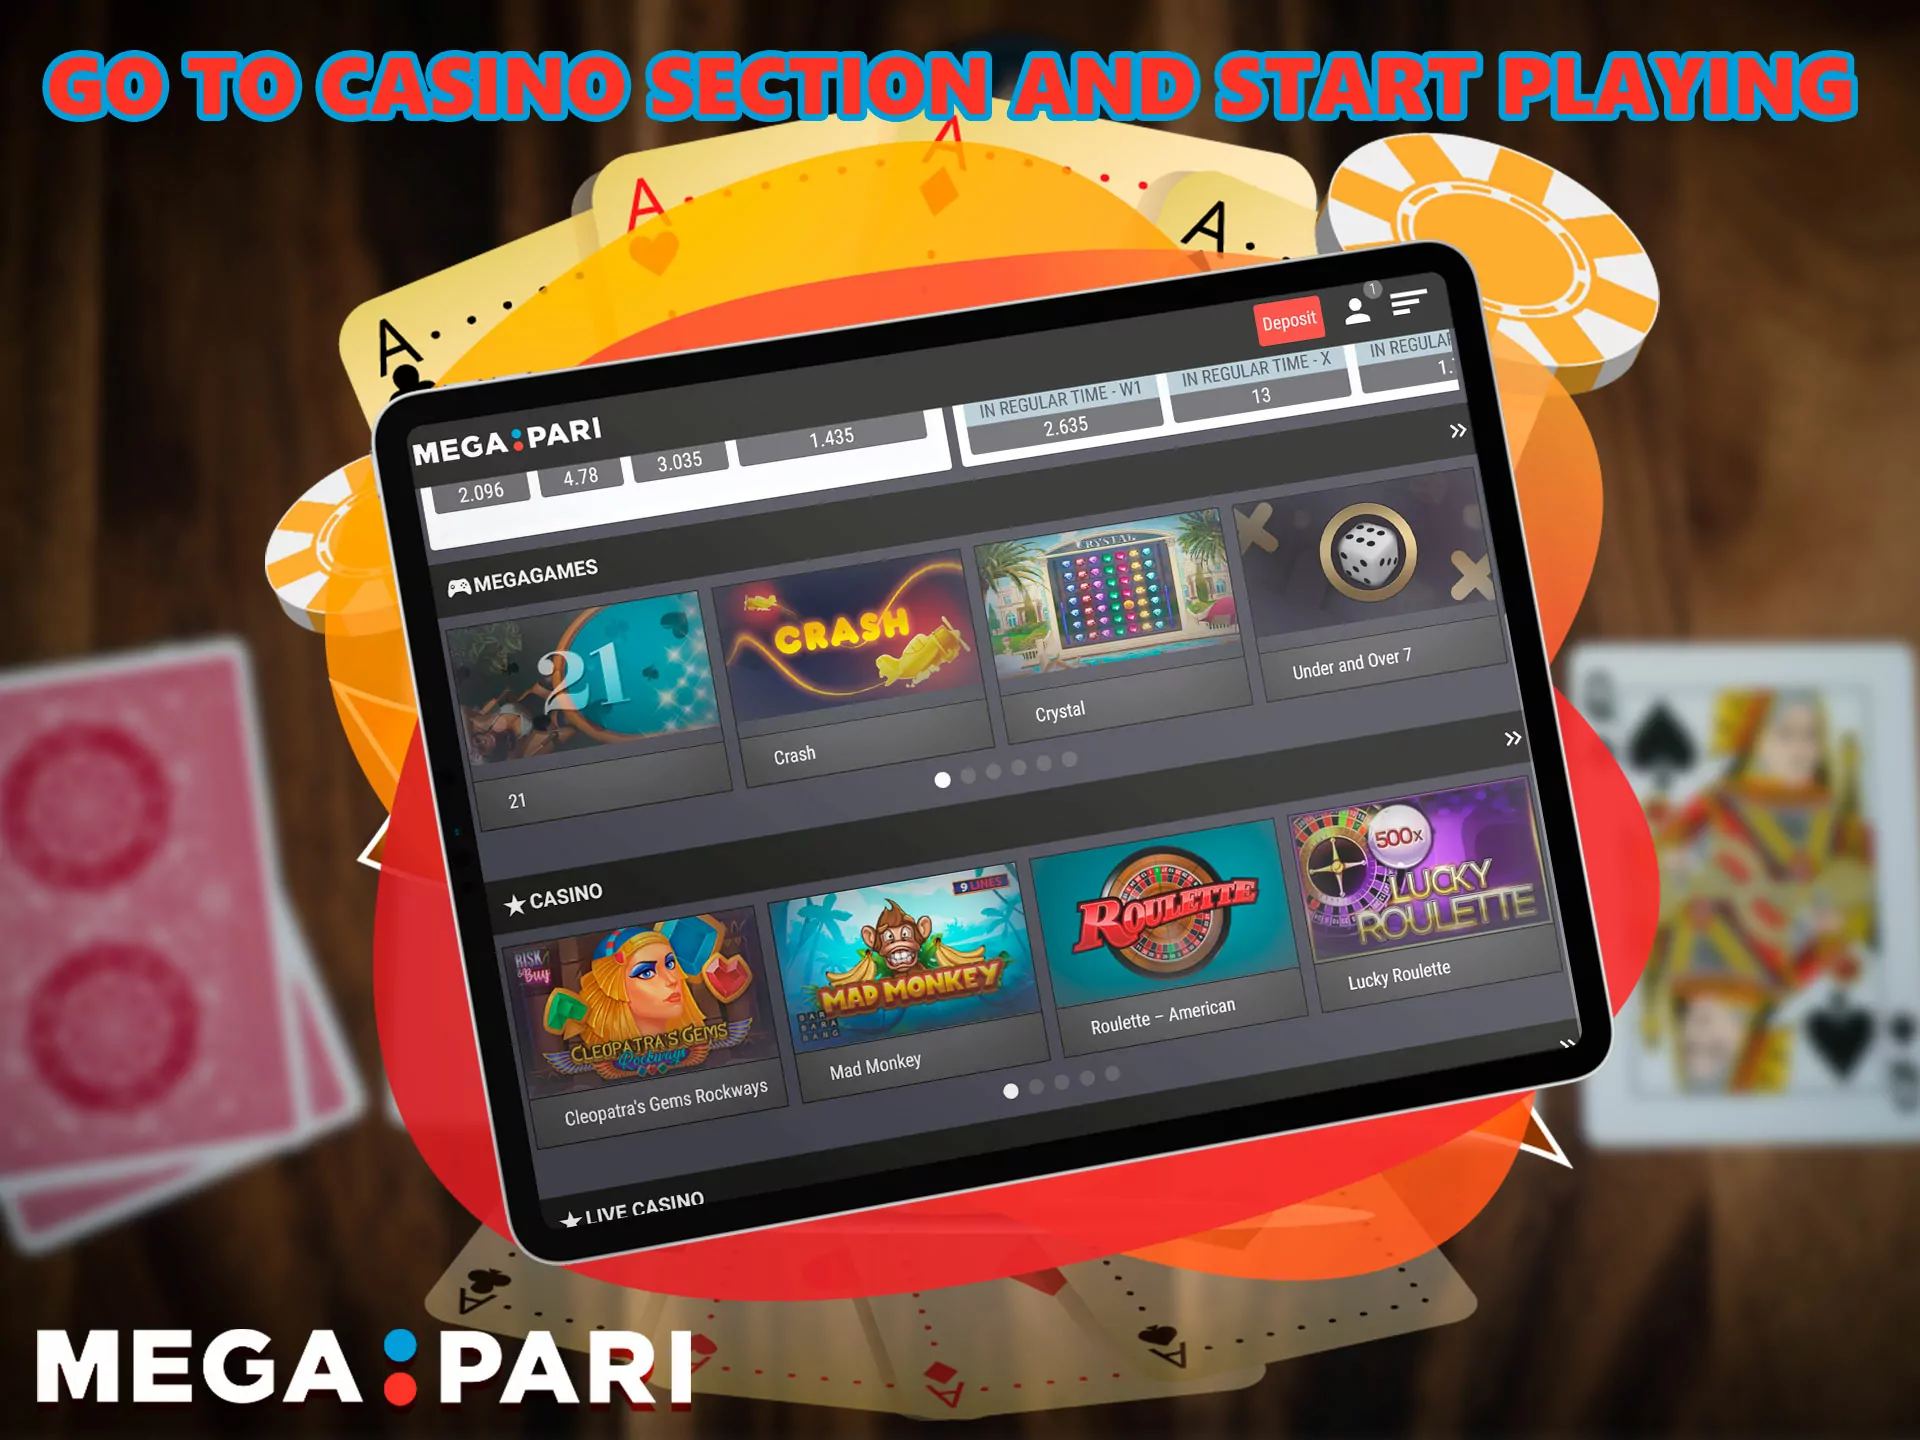 Top up your virtual Megapari account, choose the game you like and start playing, you also need to remember the rules.